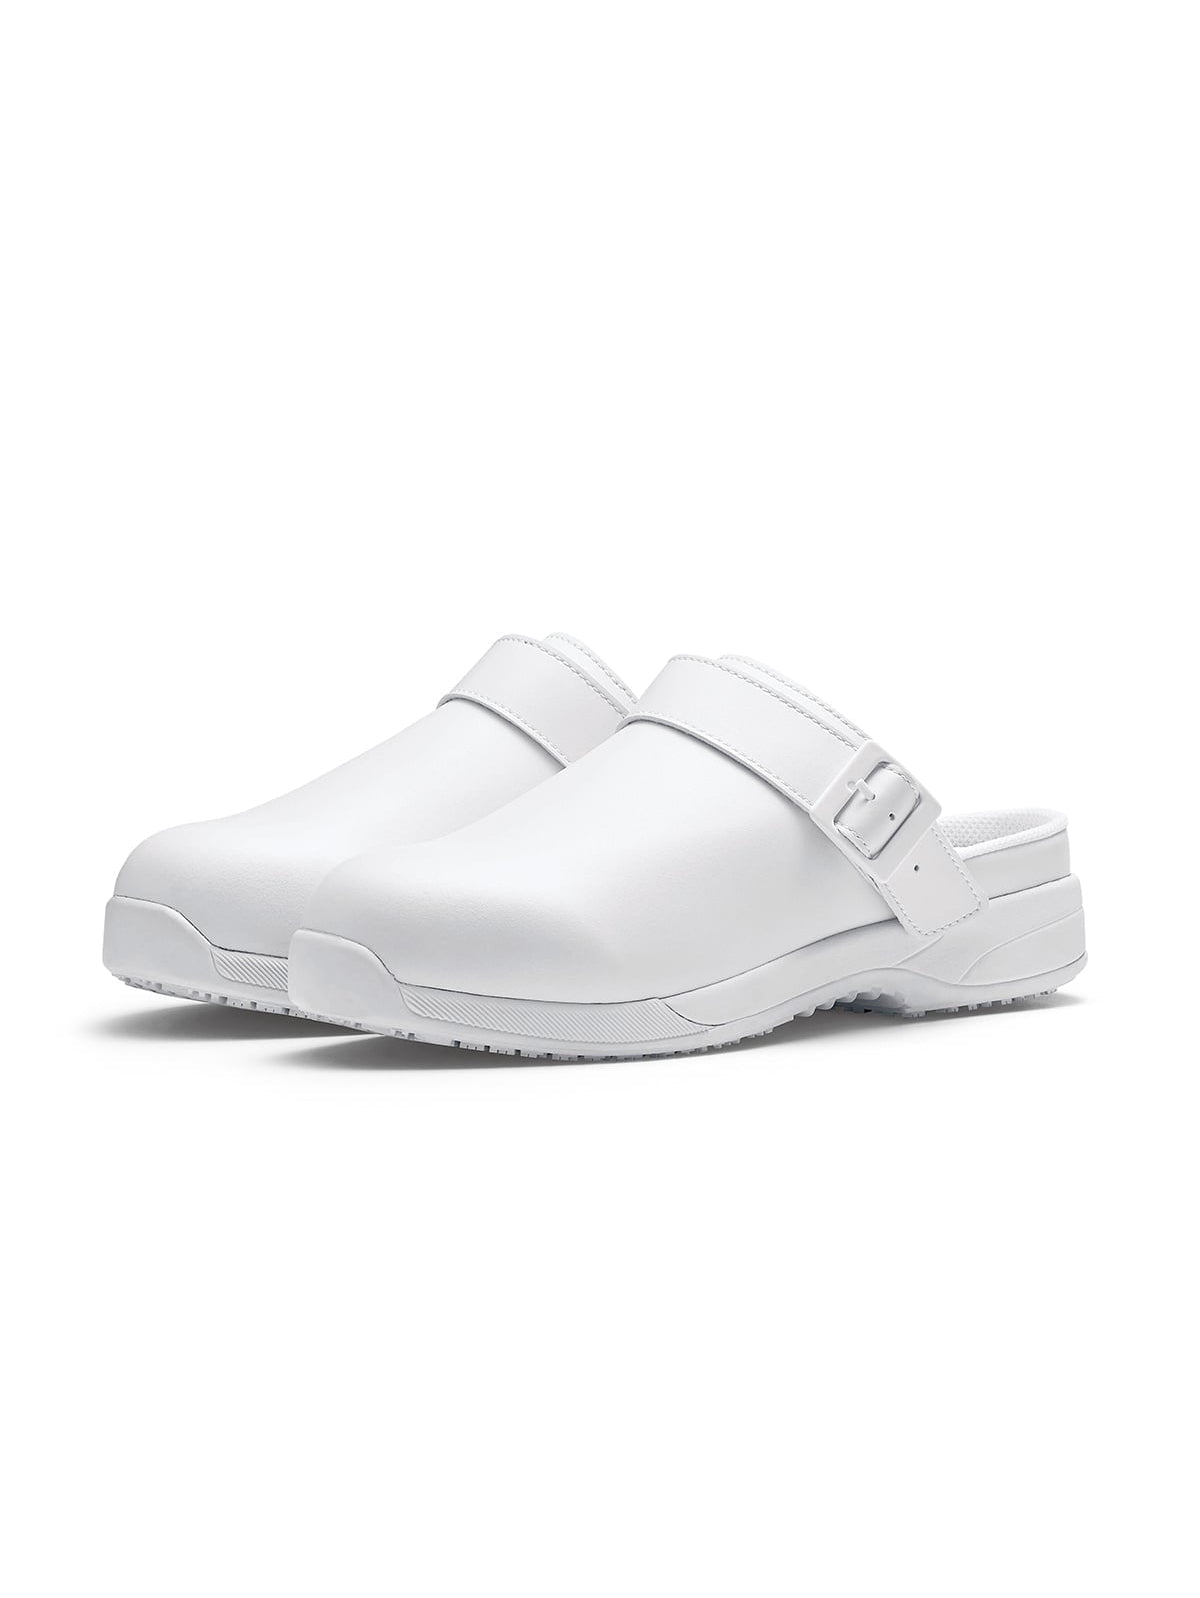 Unisex Work Shoe Triston II White by Shoes For Crews -  ChefsCotton